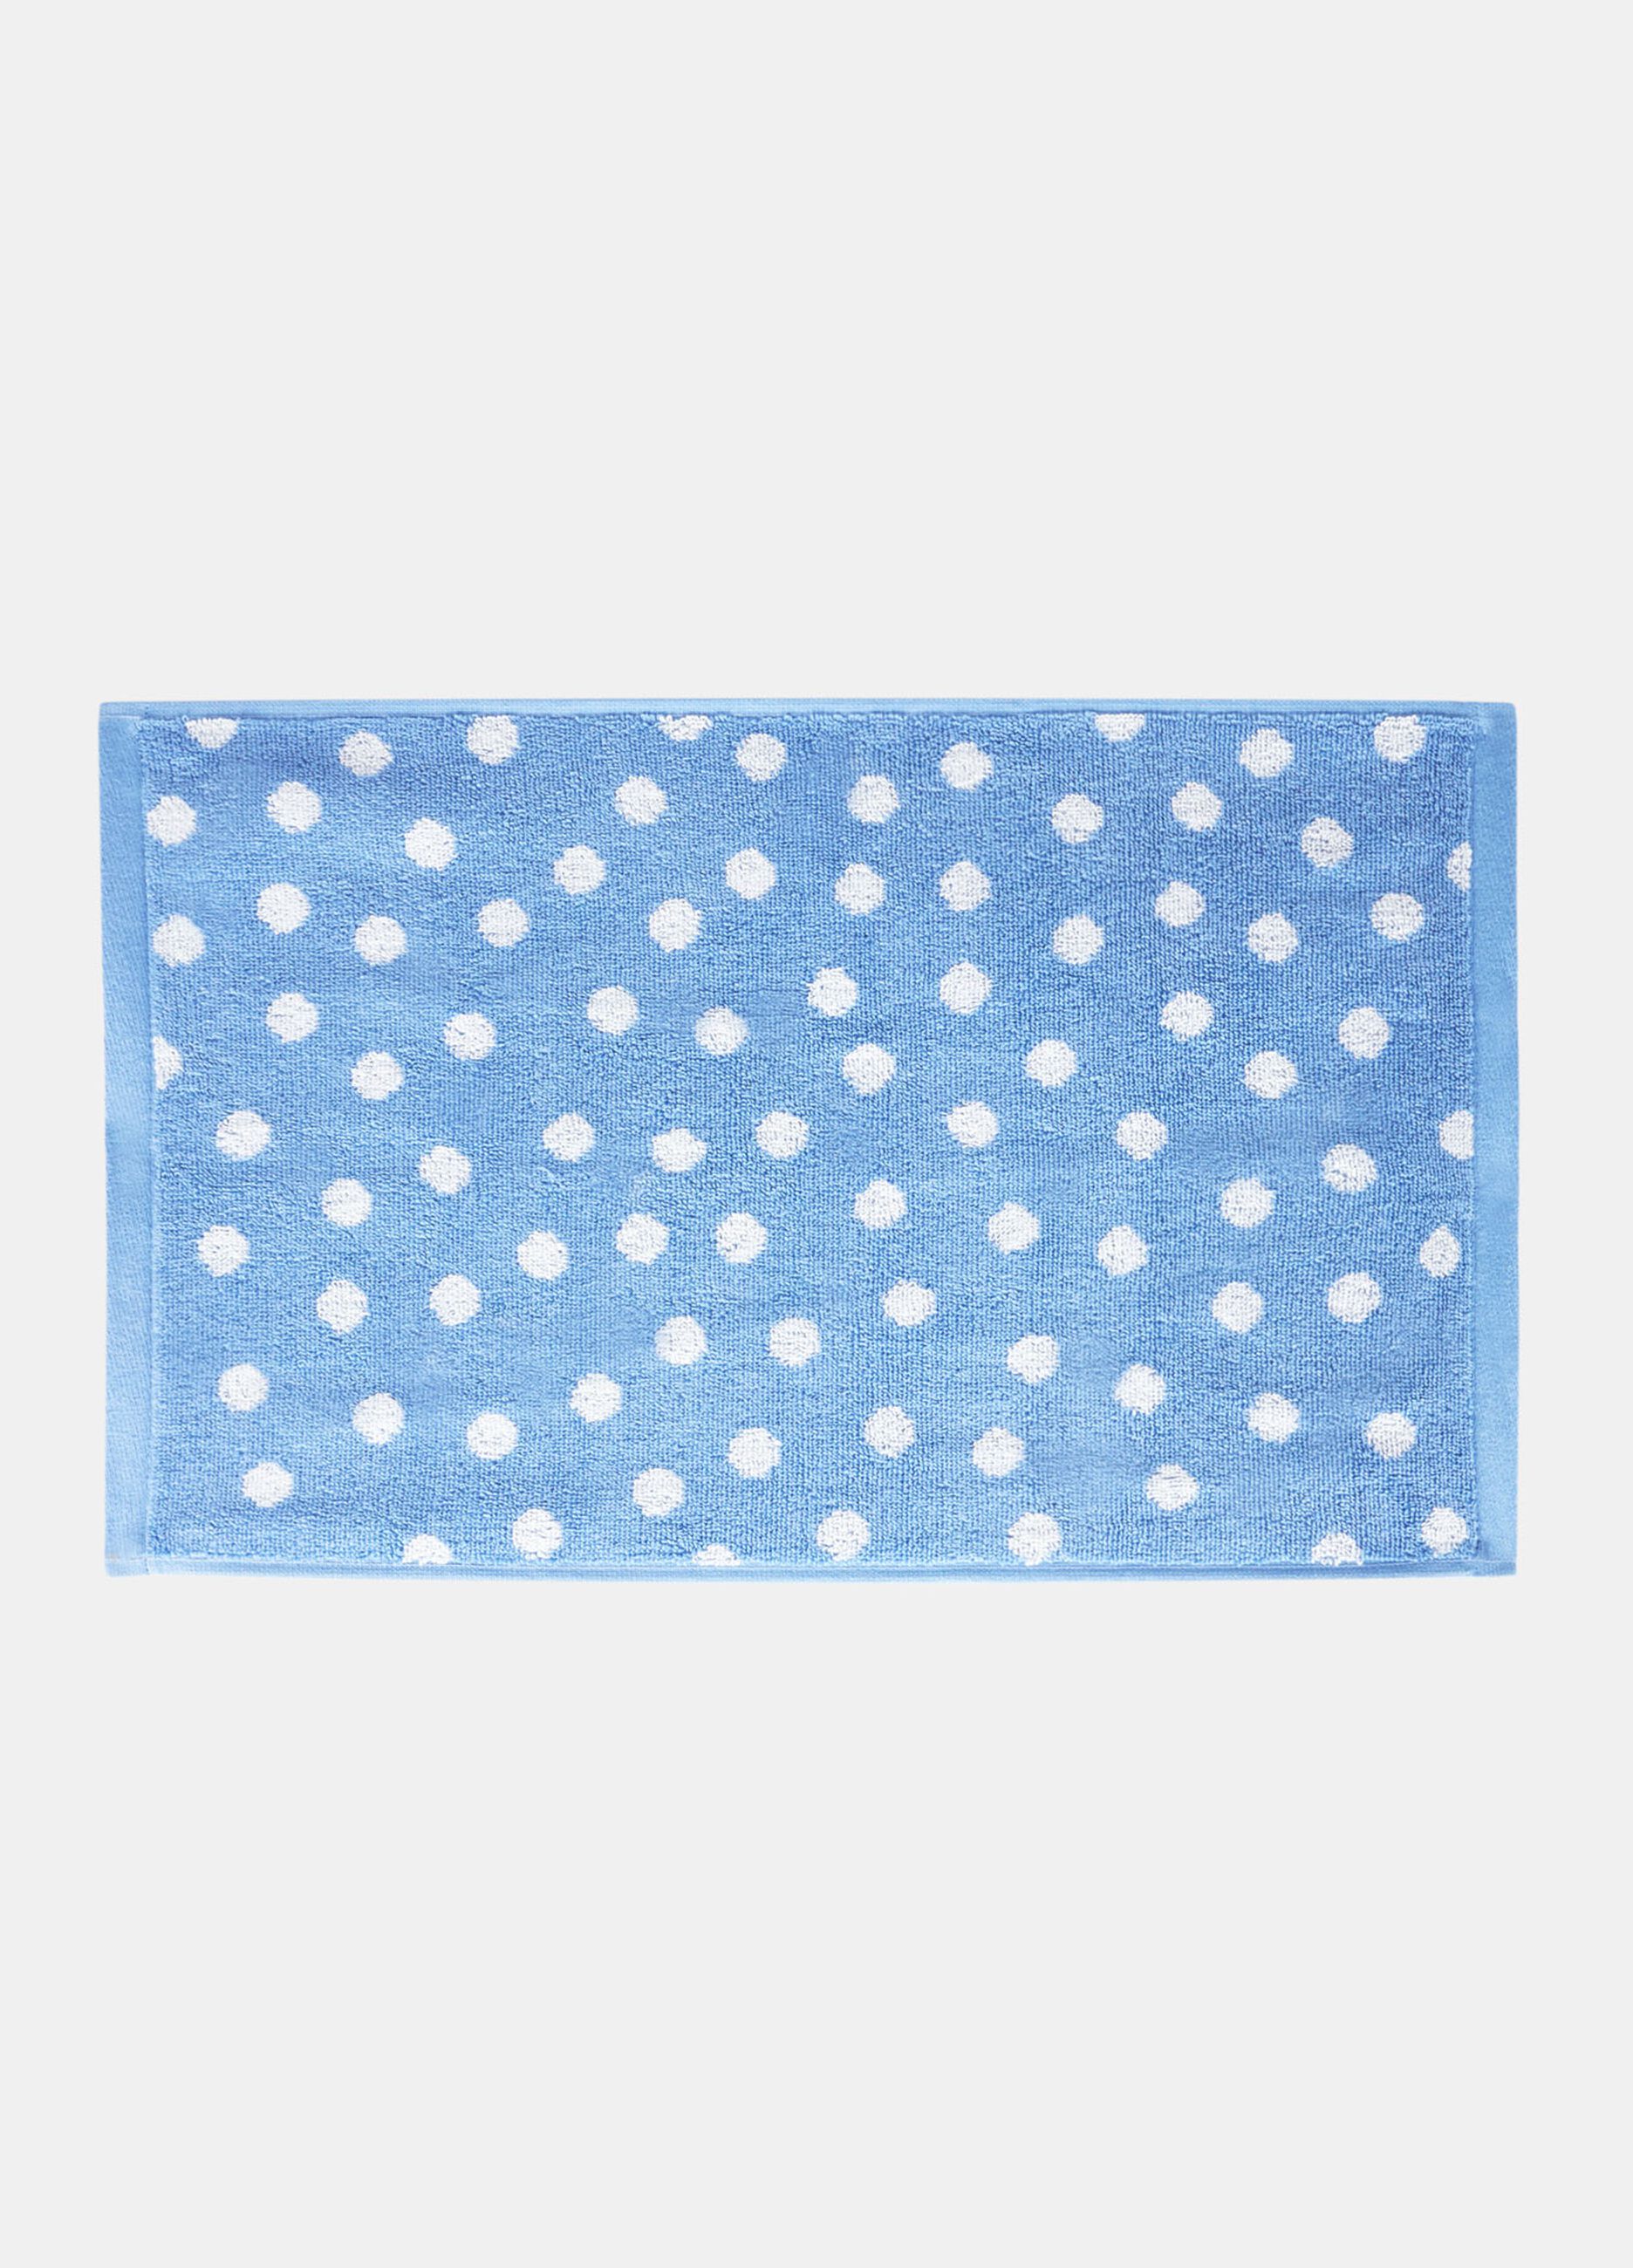 Guest towel in polka dot cotton